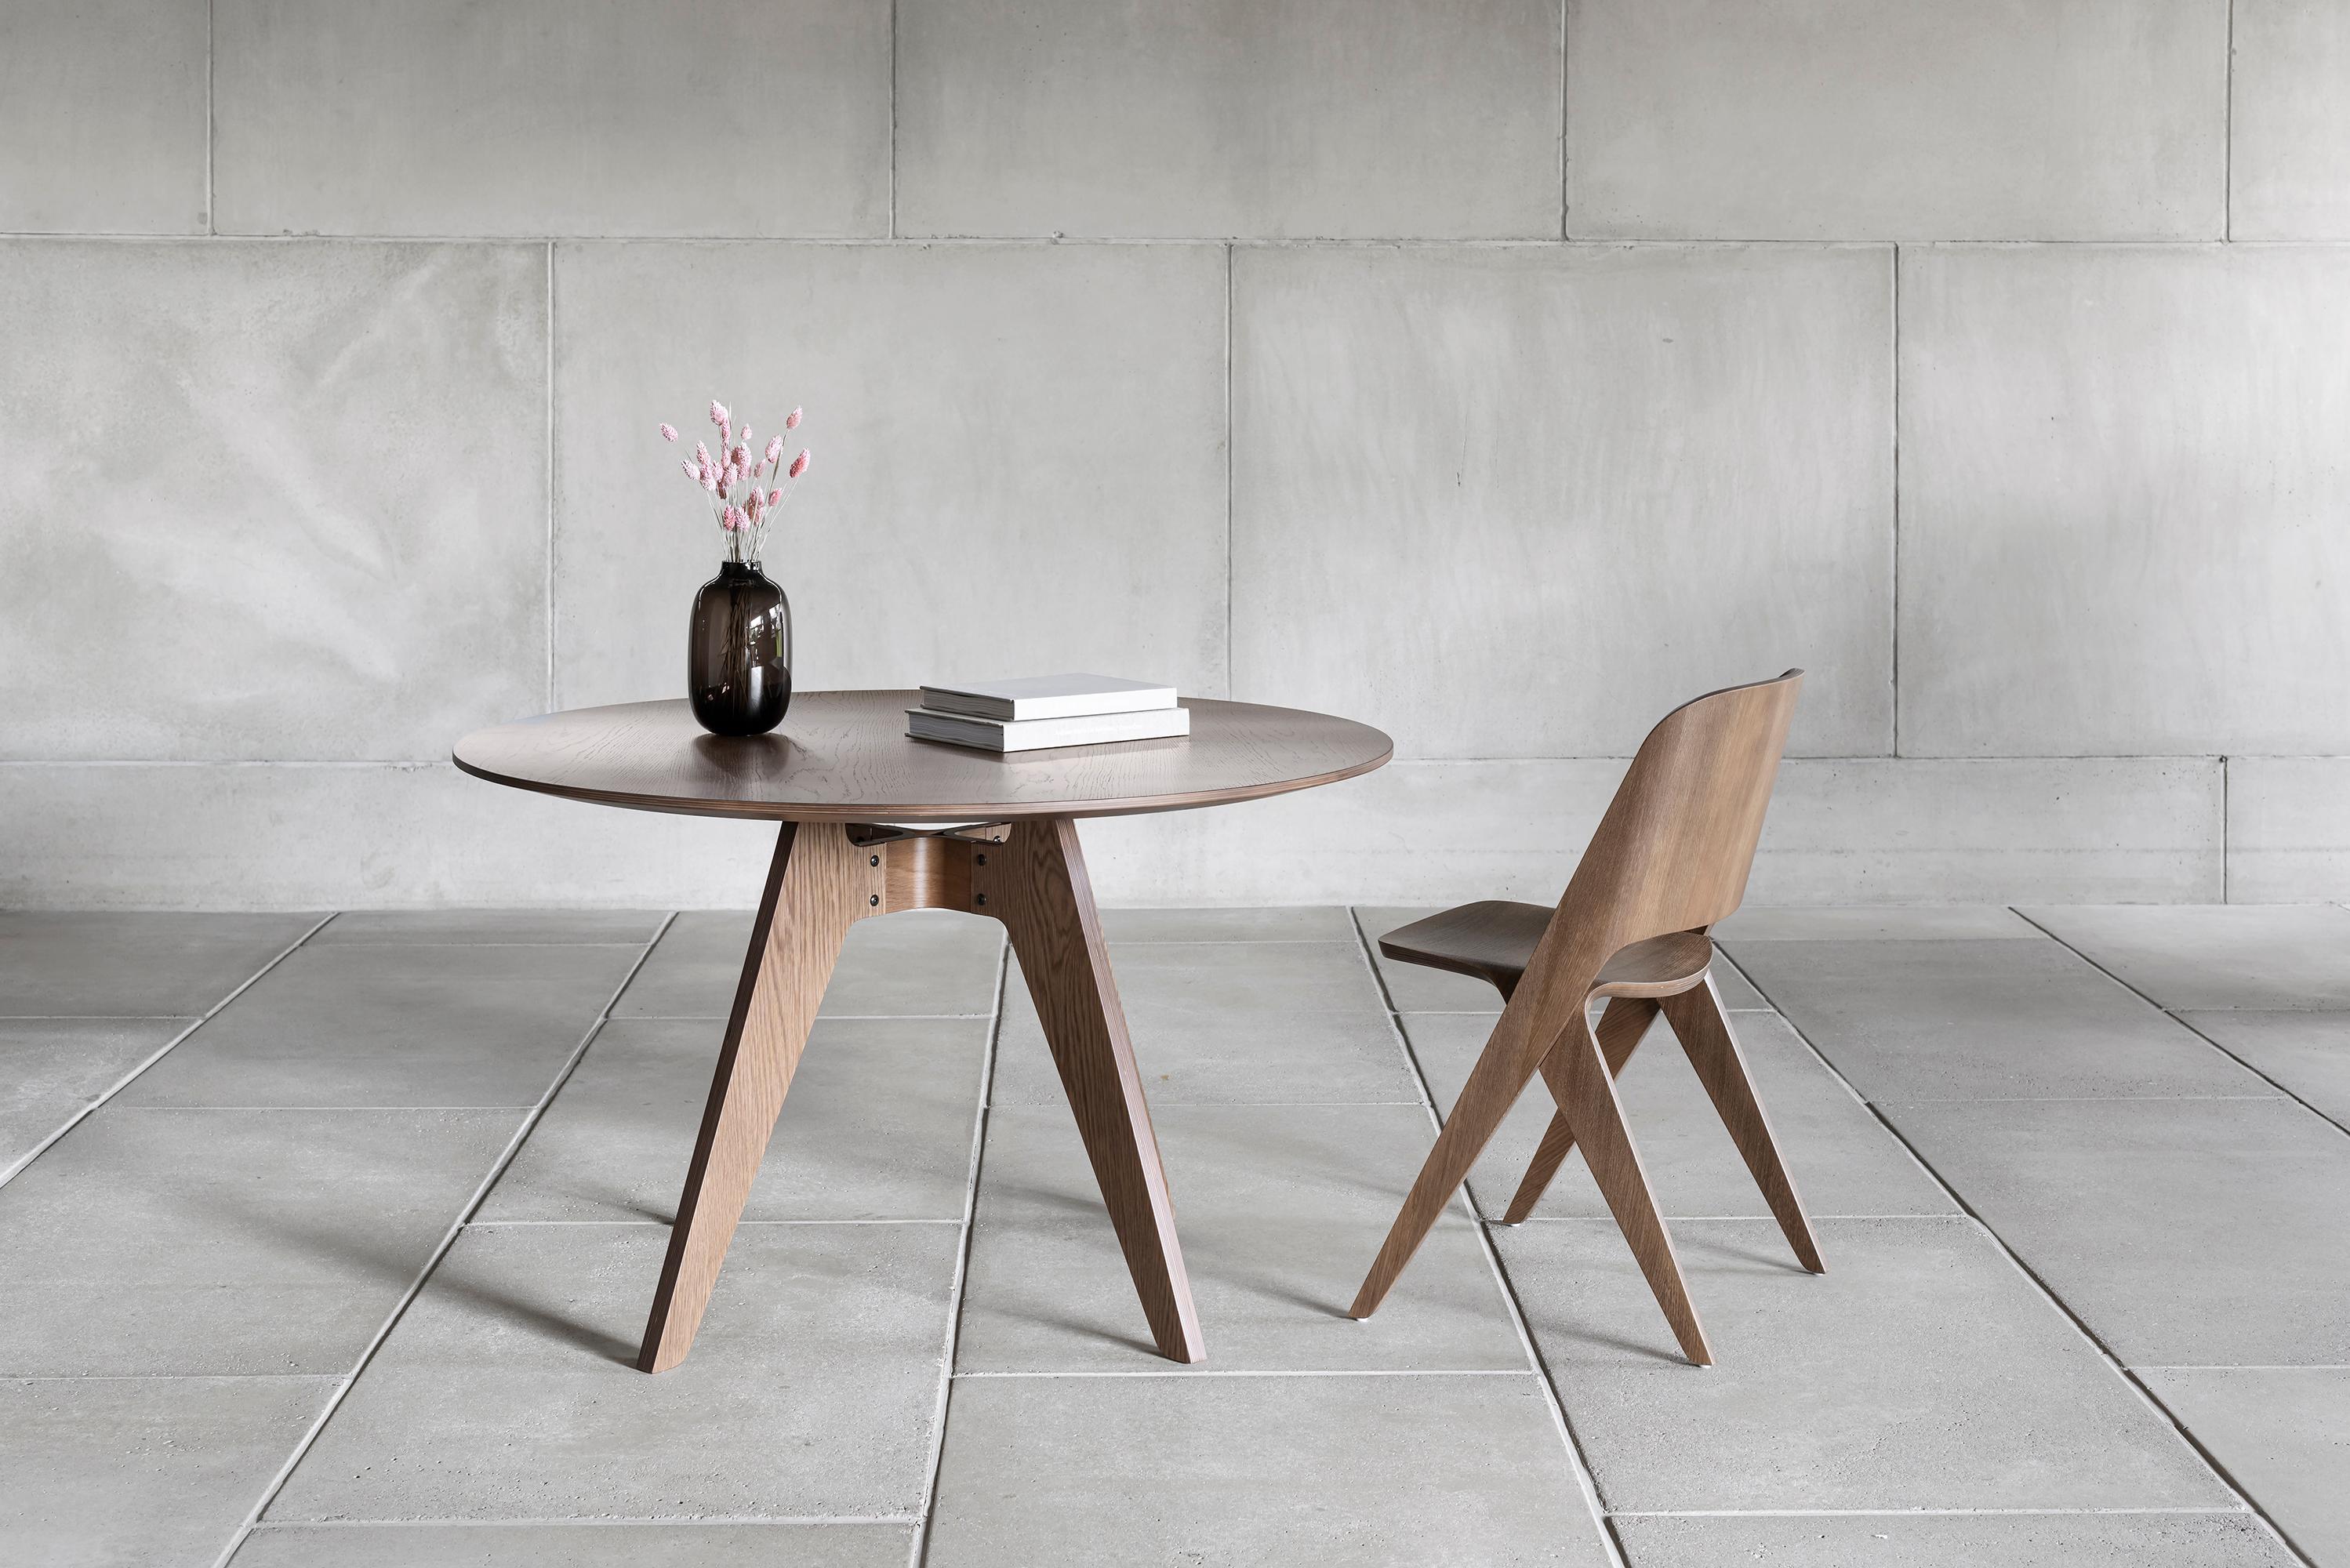 Lavitta chair by Poiat 
Designers: Timo Mikkonen & Antti Rouhunkoski
Collection Lavitta 2014

Model shown: Wood stain - Dark Oak 
Dimensions: D. 52 x W. 53 x H. 81 

The Lavitta Chair is a modern classic that focuses on the sophisticated